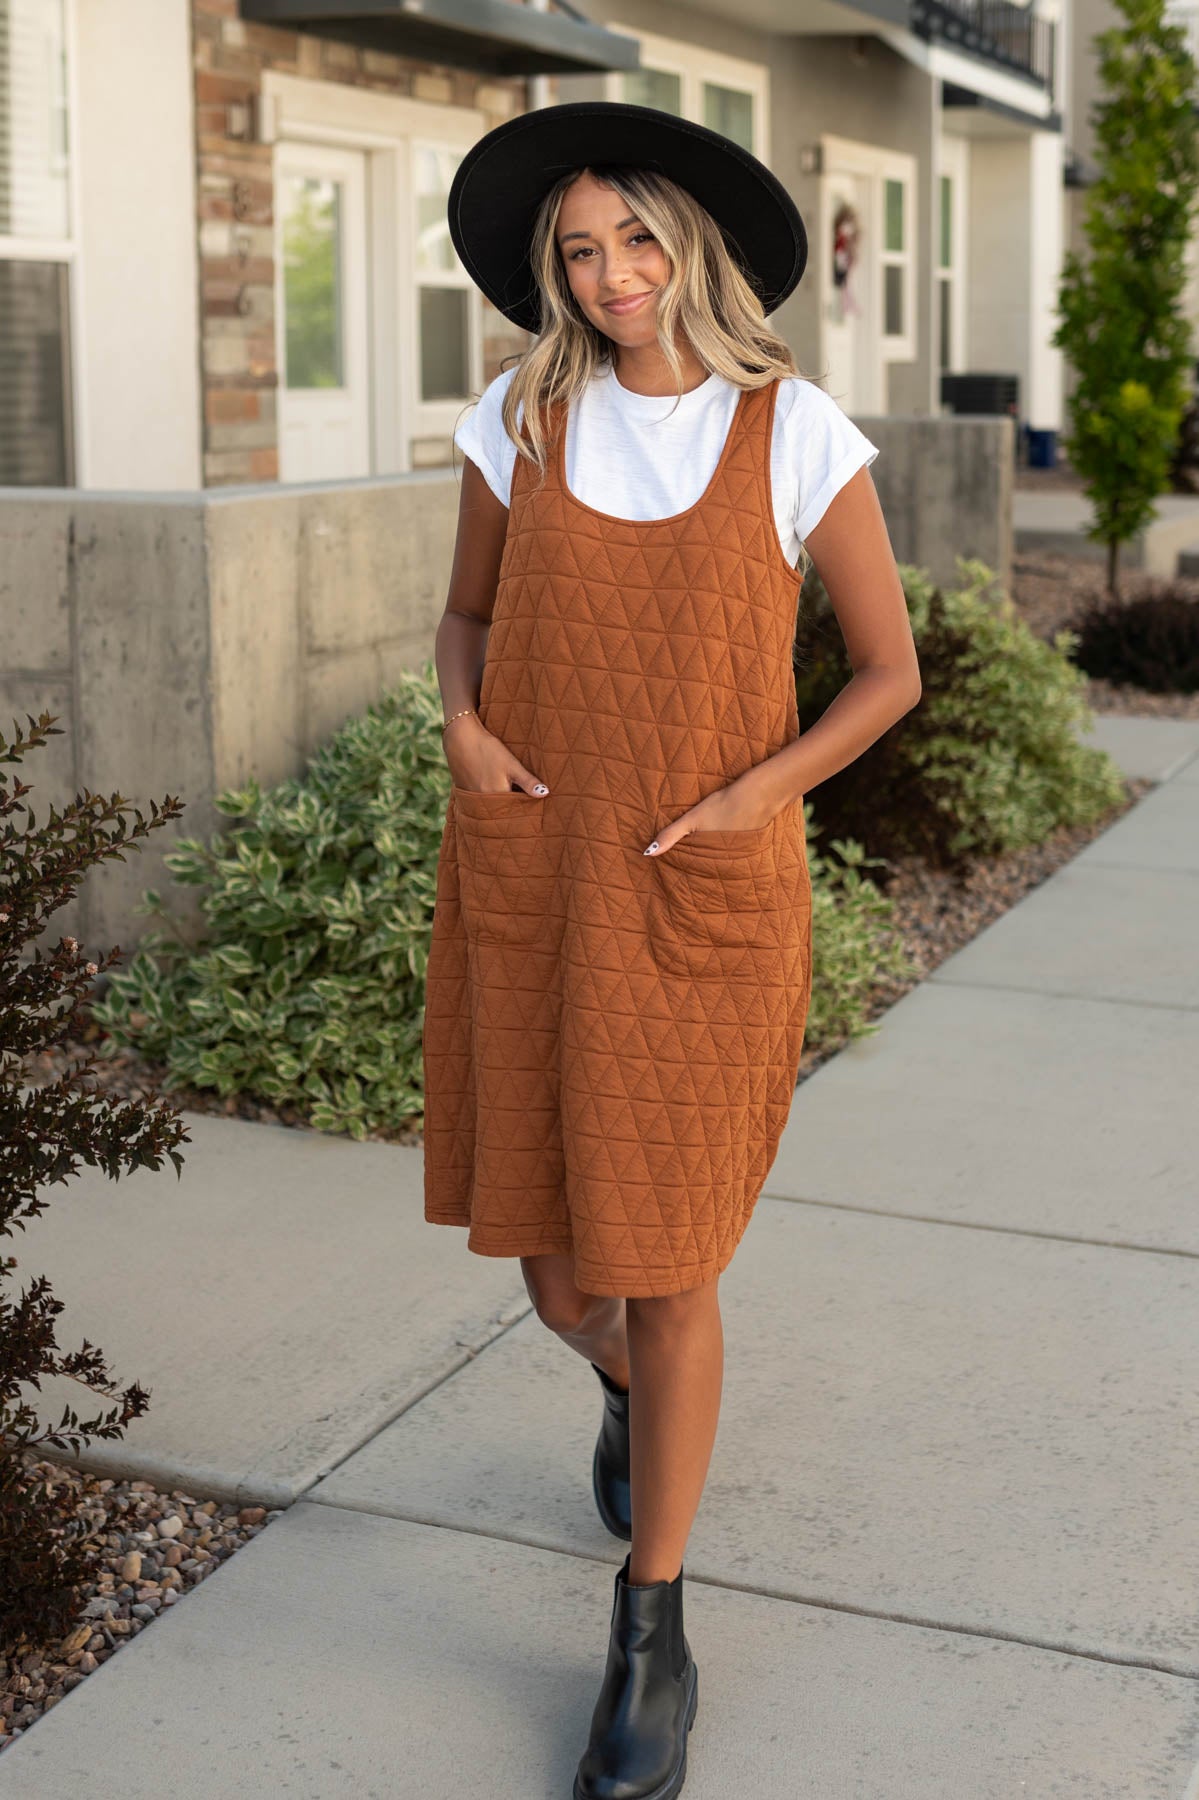 Cinnamon dress with quilted fabric and front pockets